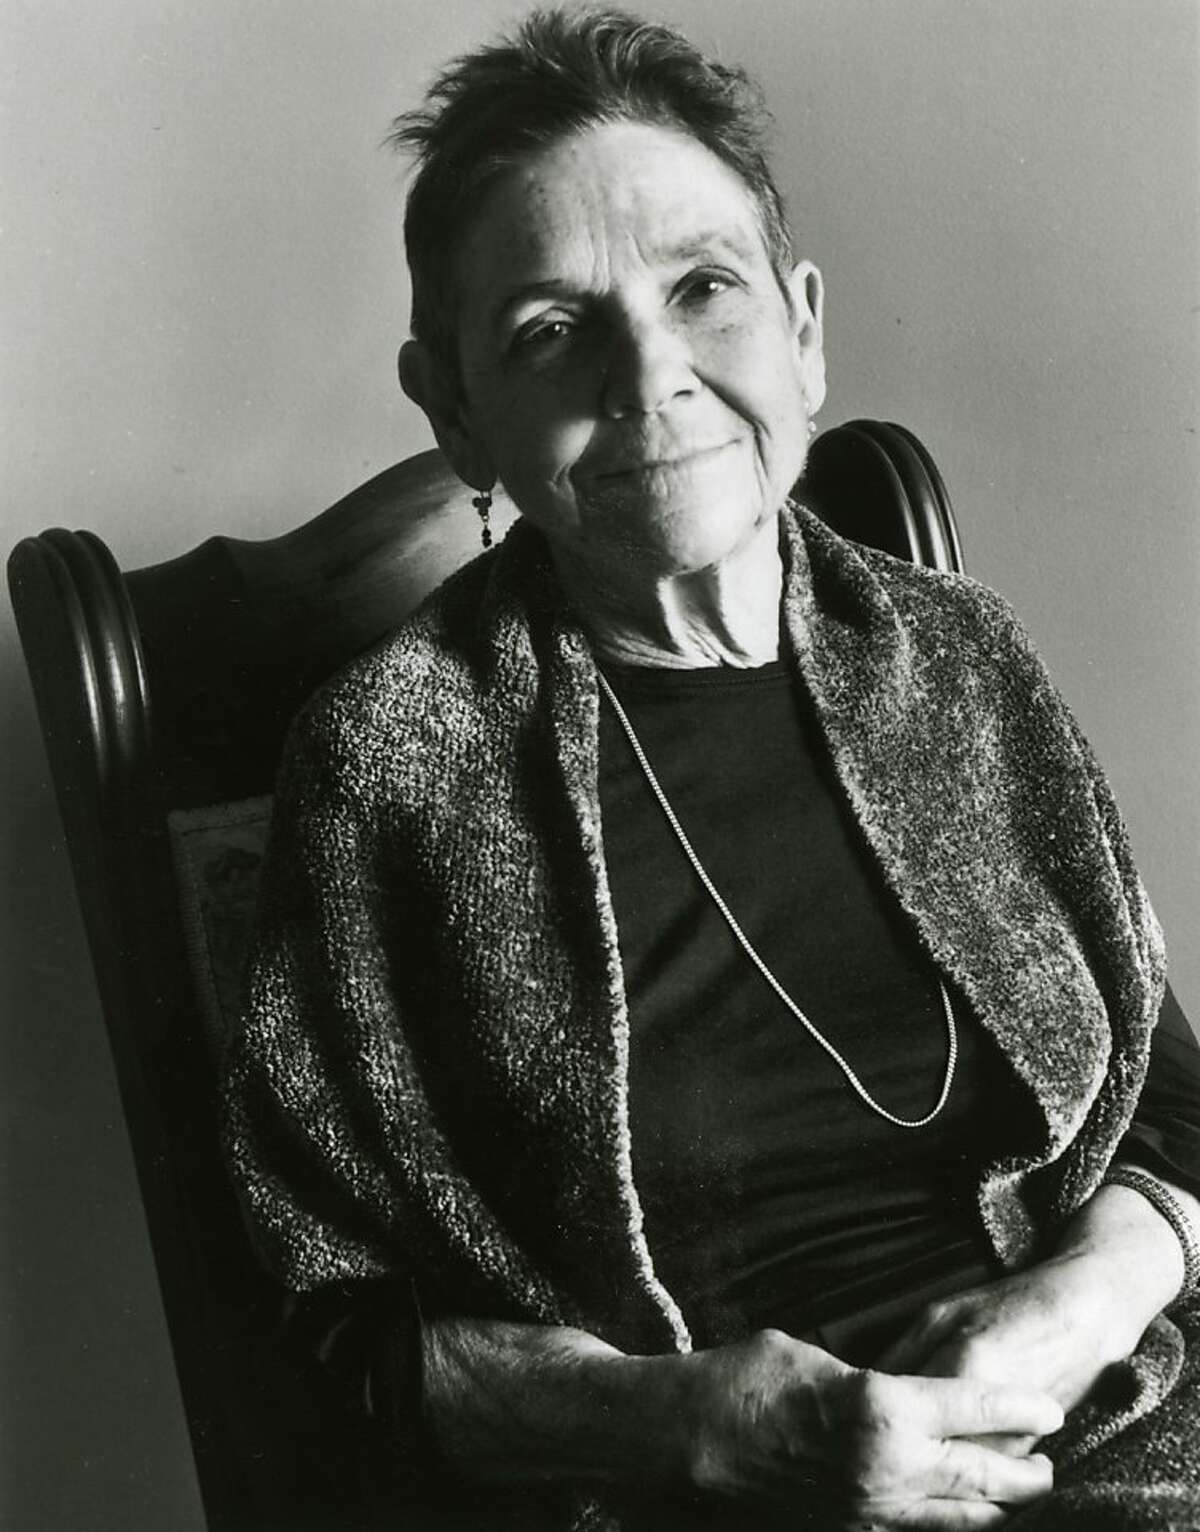 Adrienne Rich' s "The School Among the Ruins: Poems 2000-2004" won the 2004 National Book Critics Circle Award for Poetry.